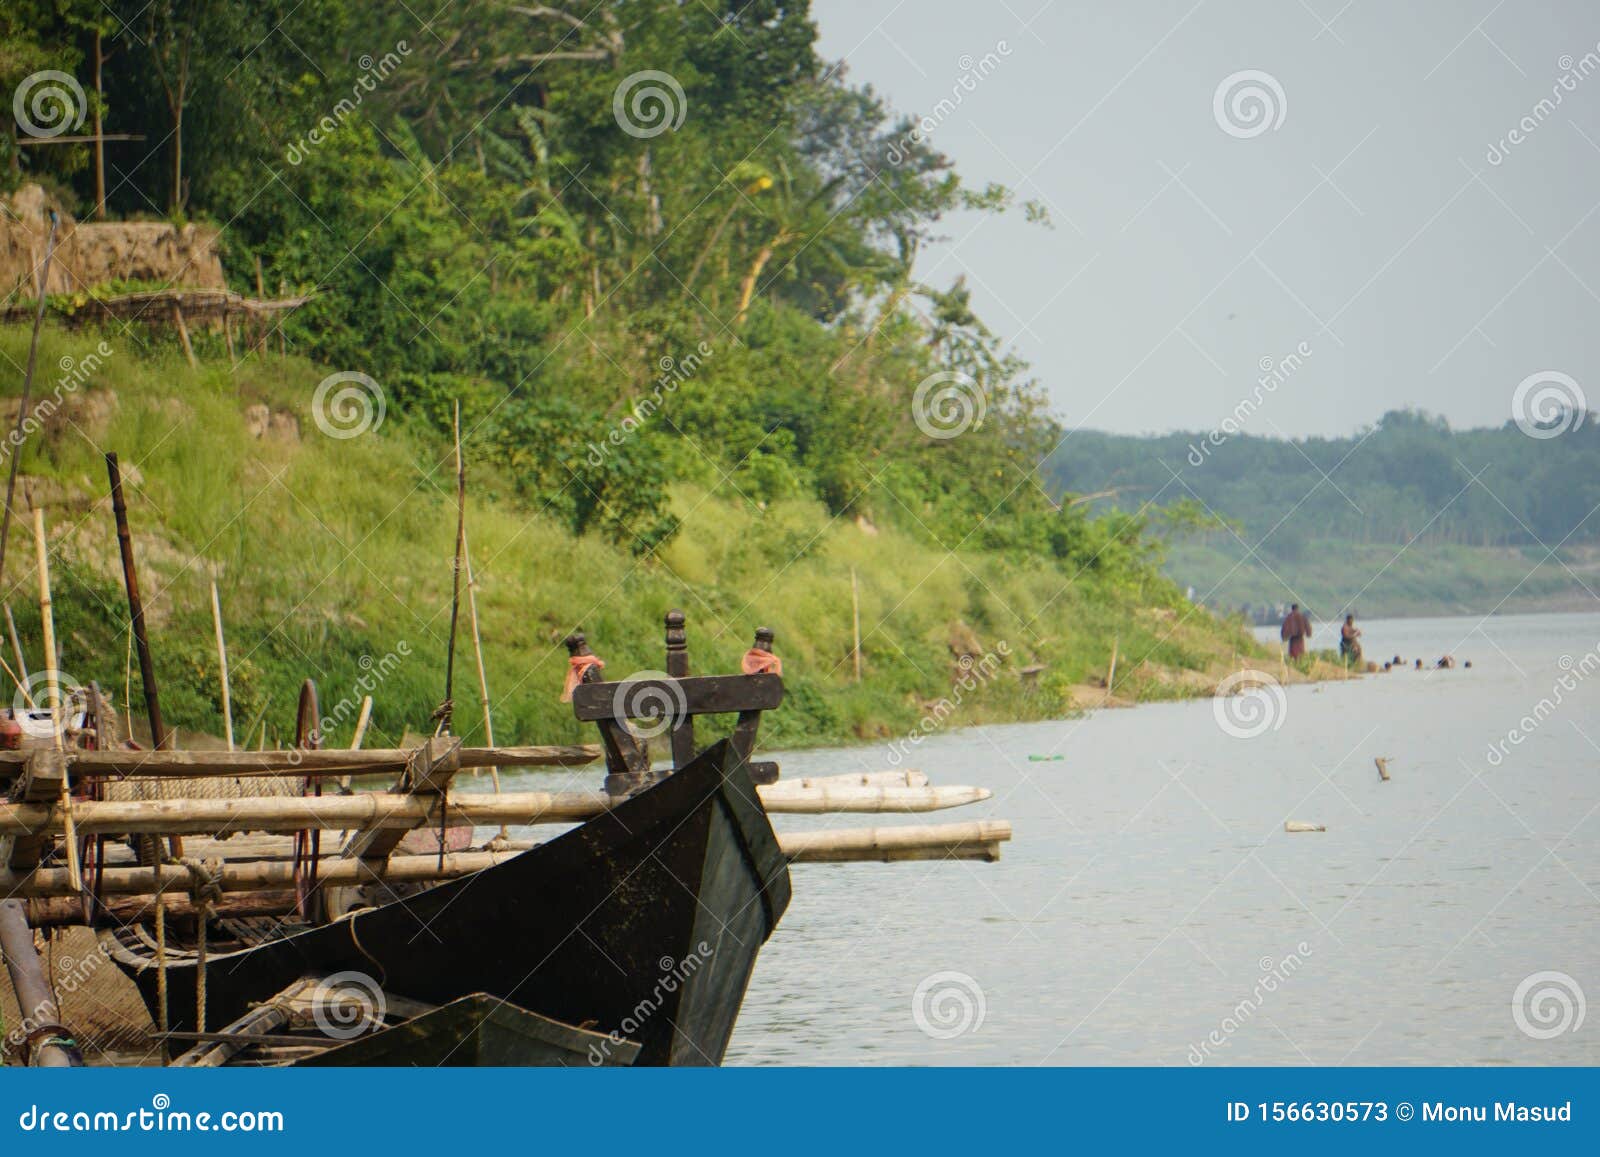 picture of the caught hilsa or hilsha boat on the banks of the river gorai in bangladesh